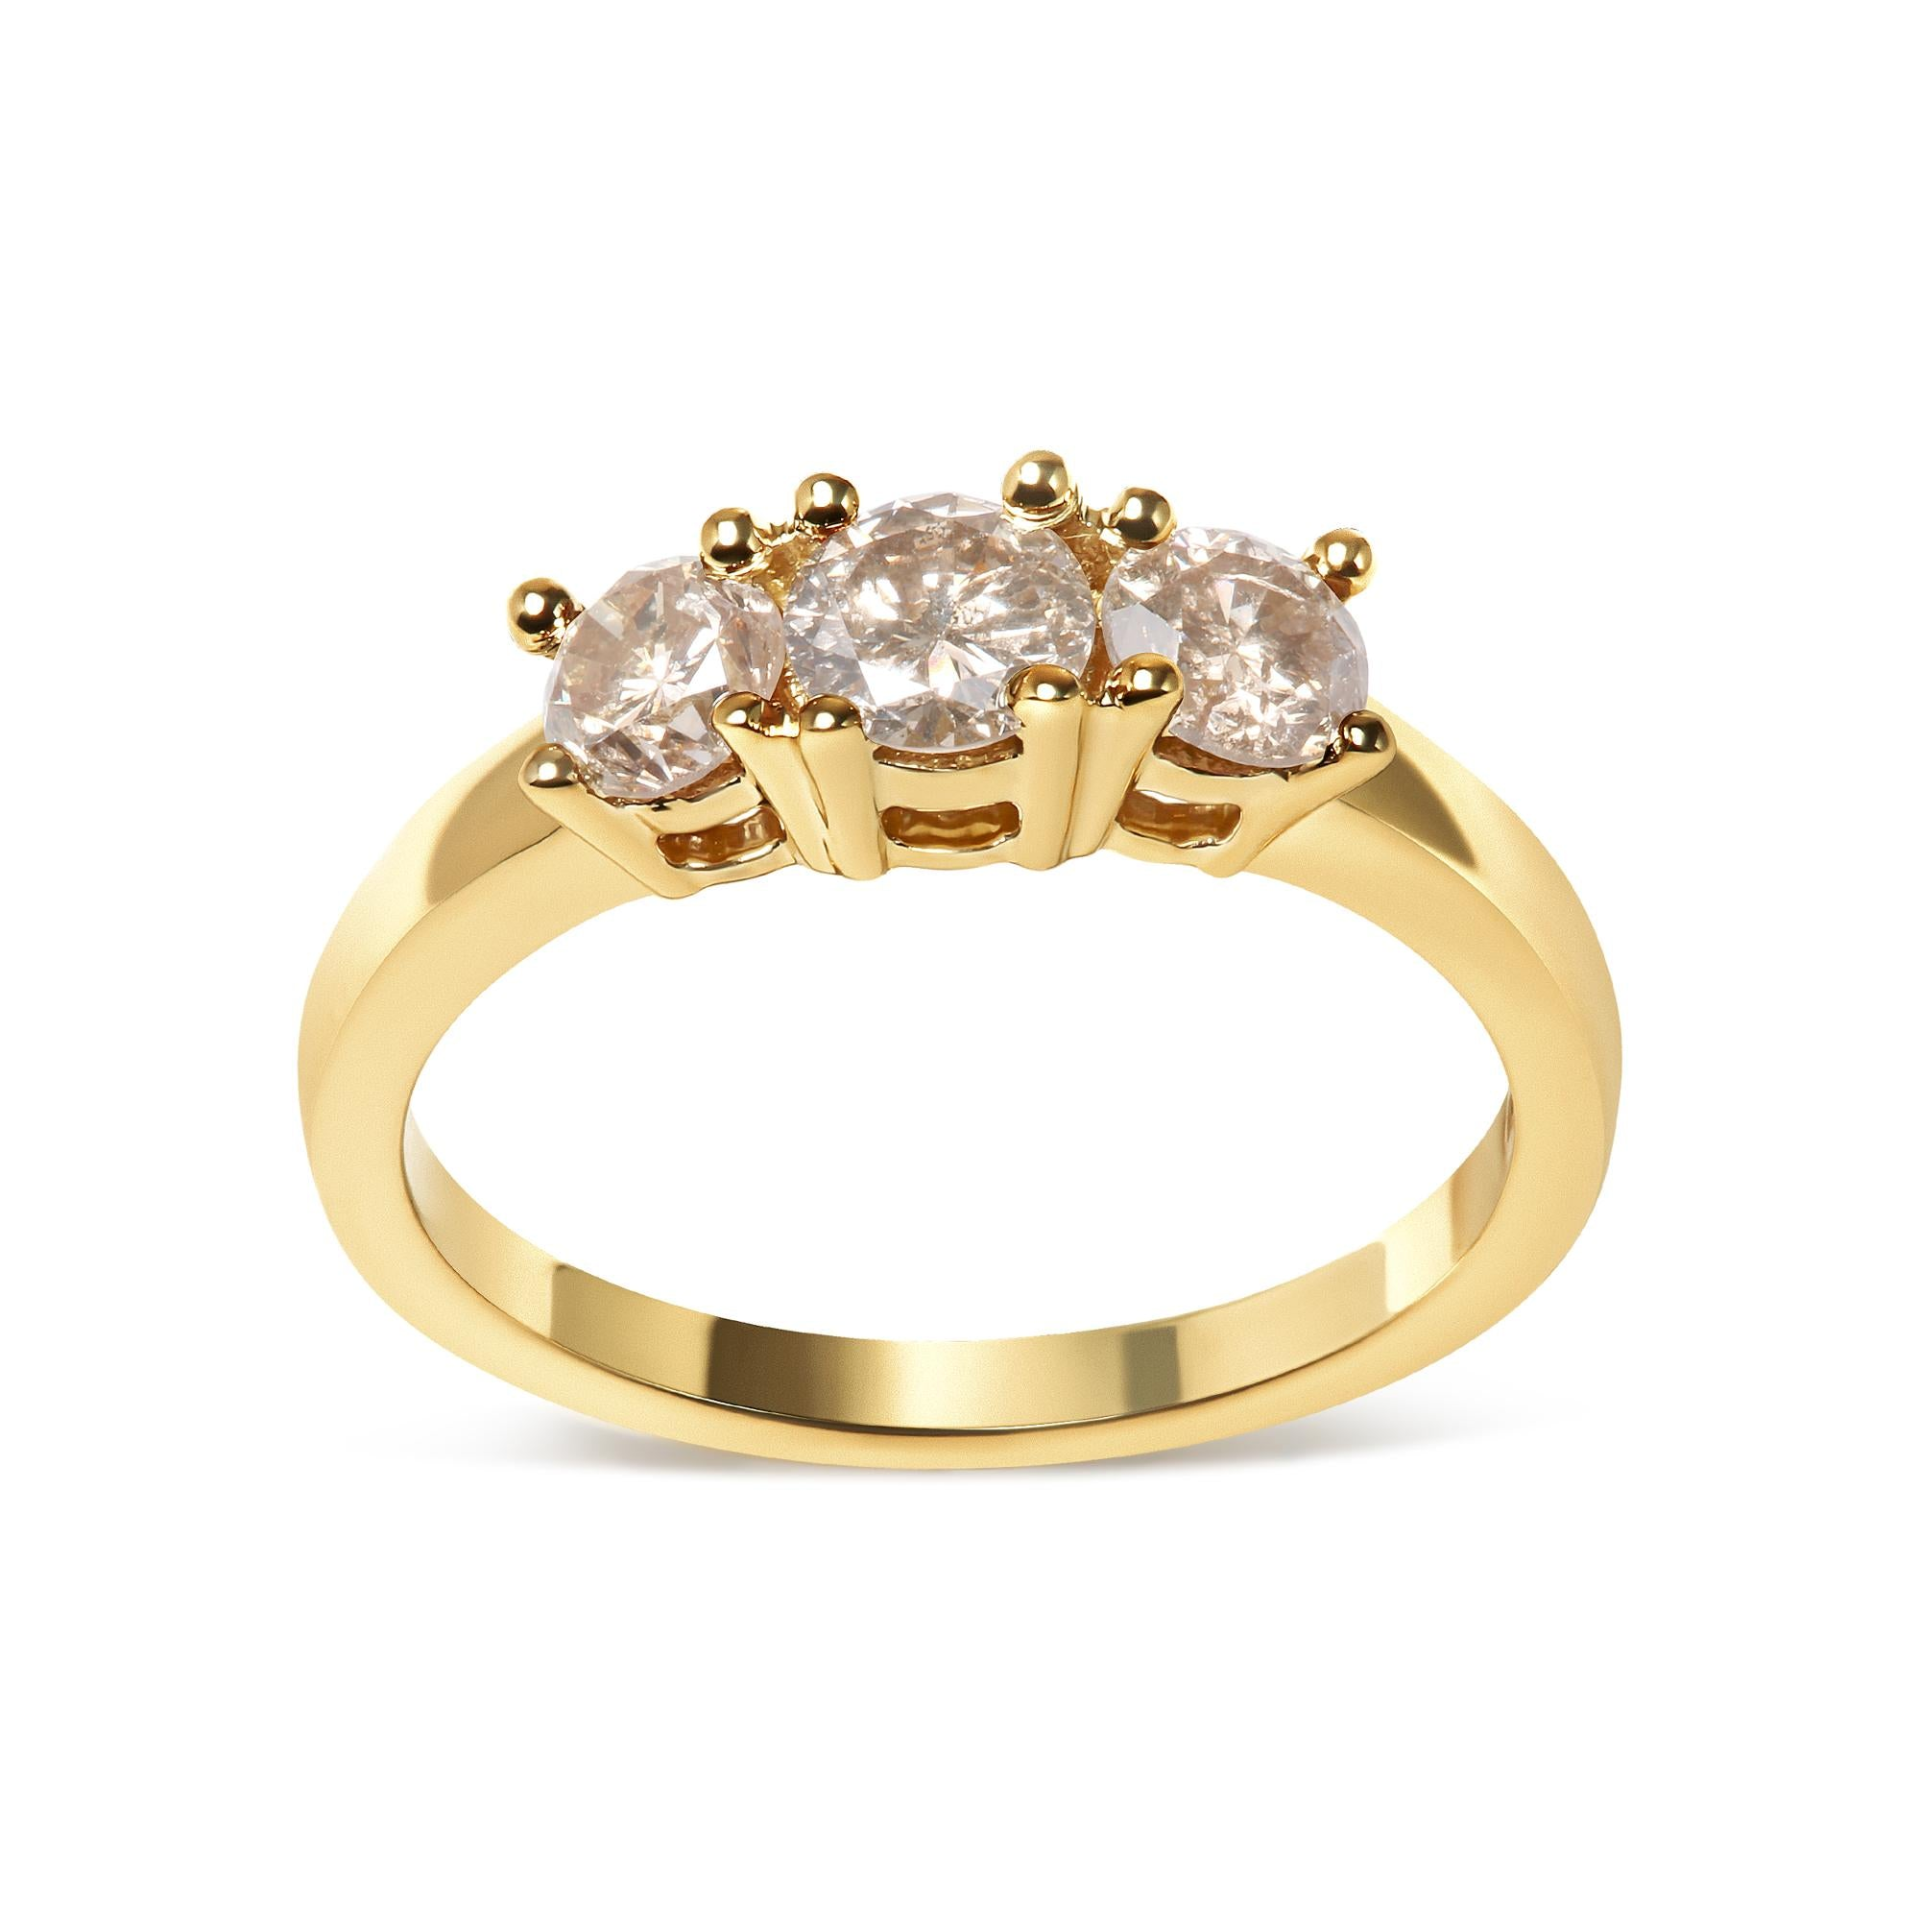 10K Yellow Gold 1.00 Cttw Champagne Diamond 3-Stone Band Ring (J-K Color, I1-I2 Clarity), Goodies N Stuff